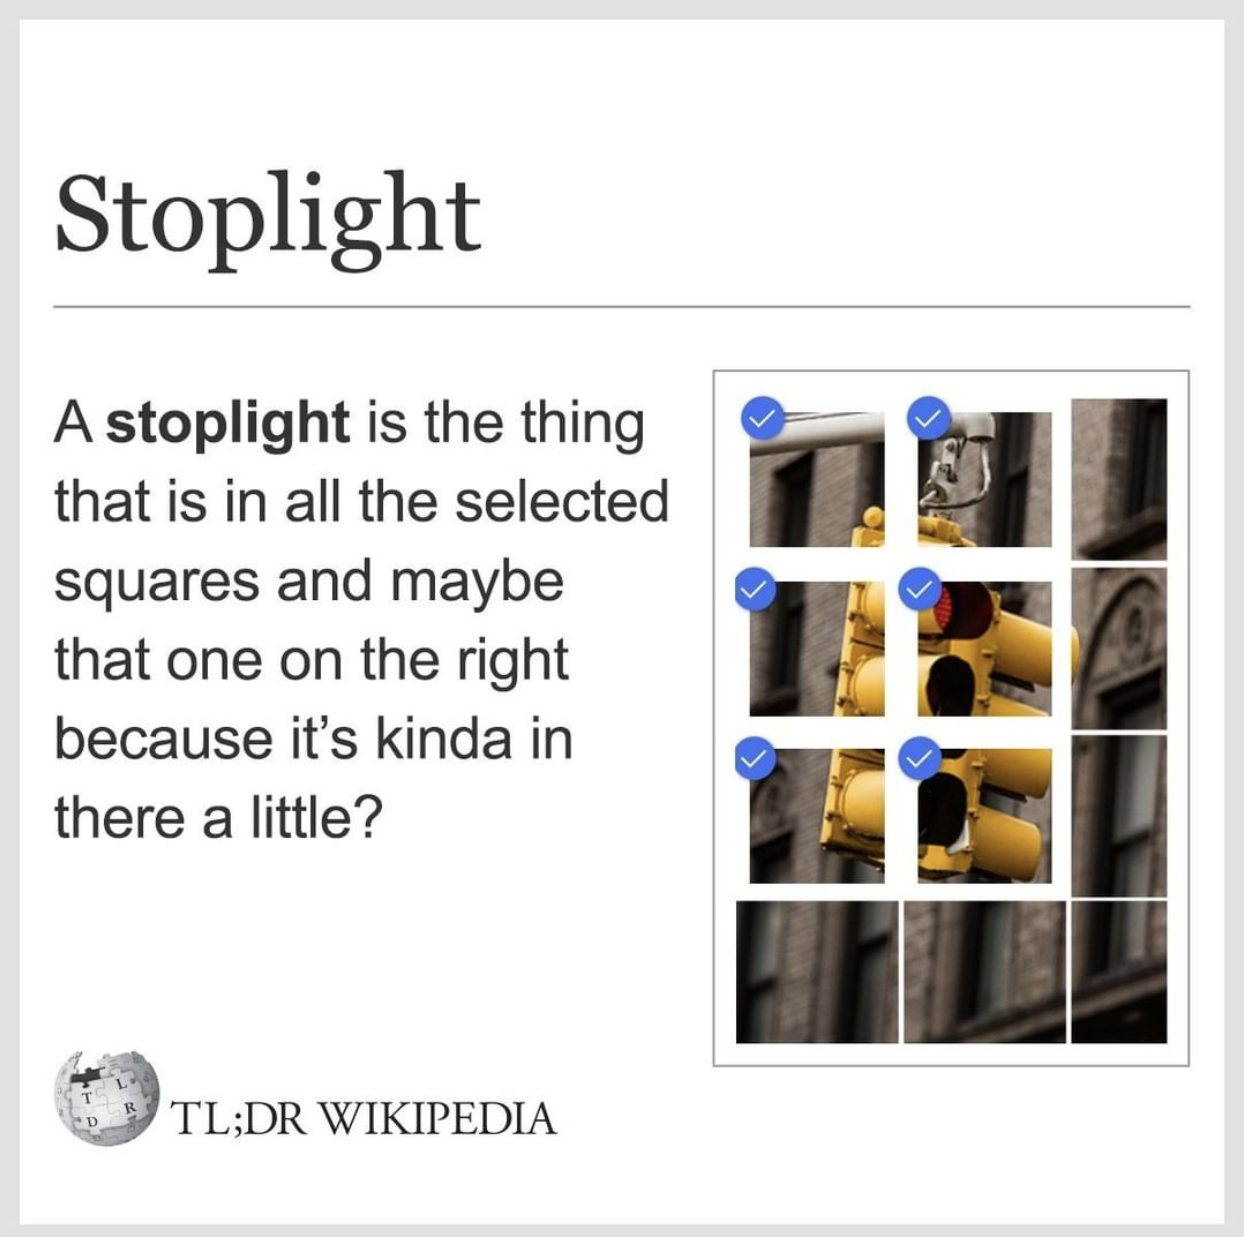 Wikipedia Memes - data insight - Stoplight A stoplight is the thing that is in all the selected squares and maybe that one on the right because it's kinda in there a little? Tl;Dr Wikipedia